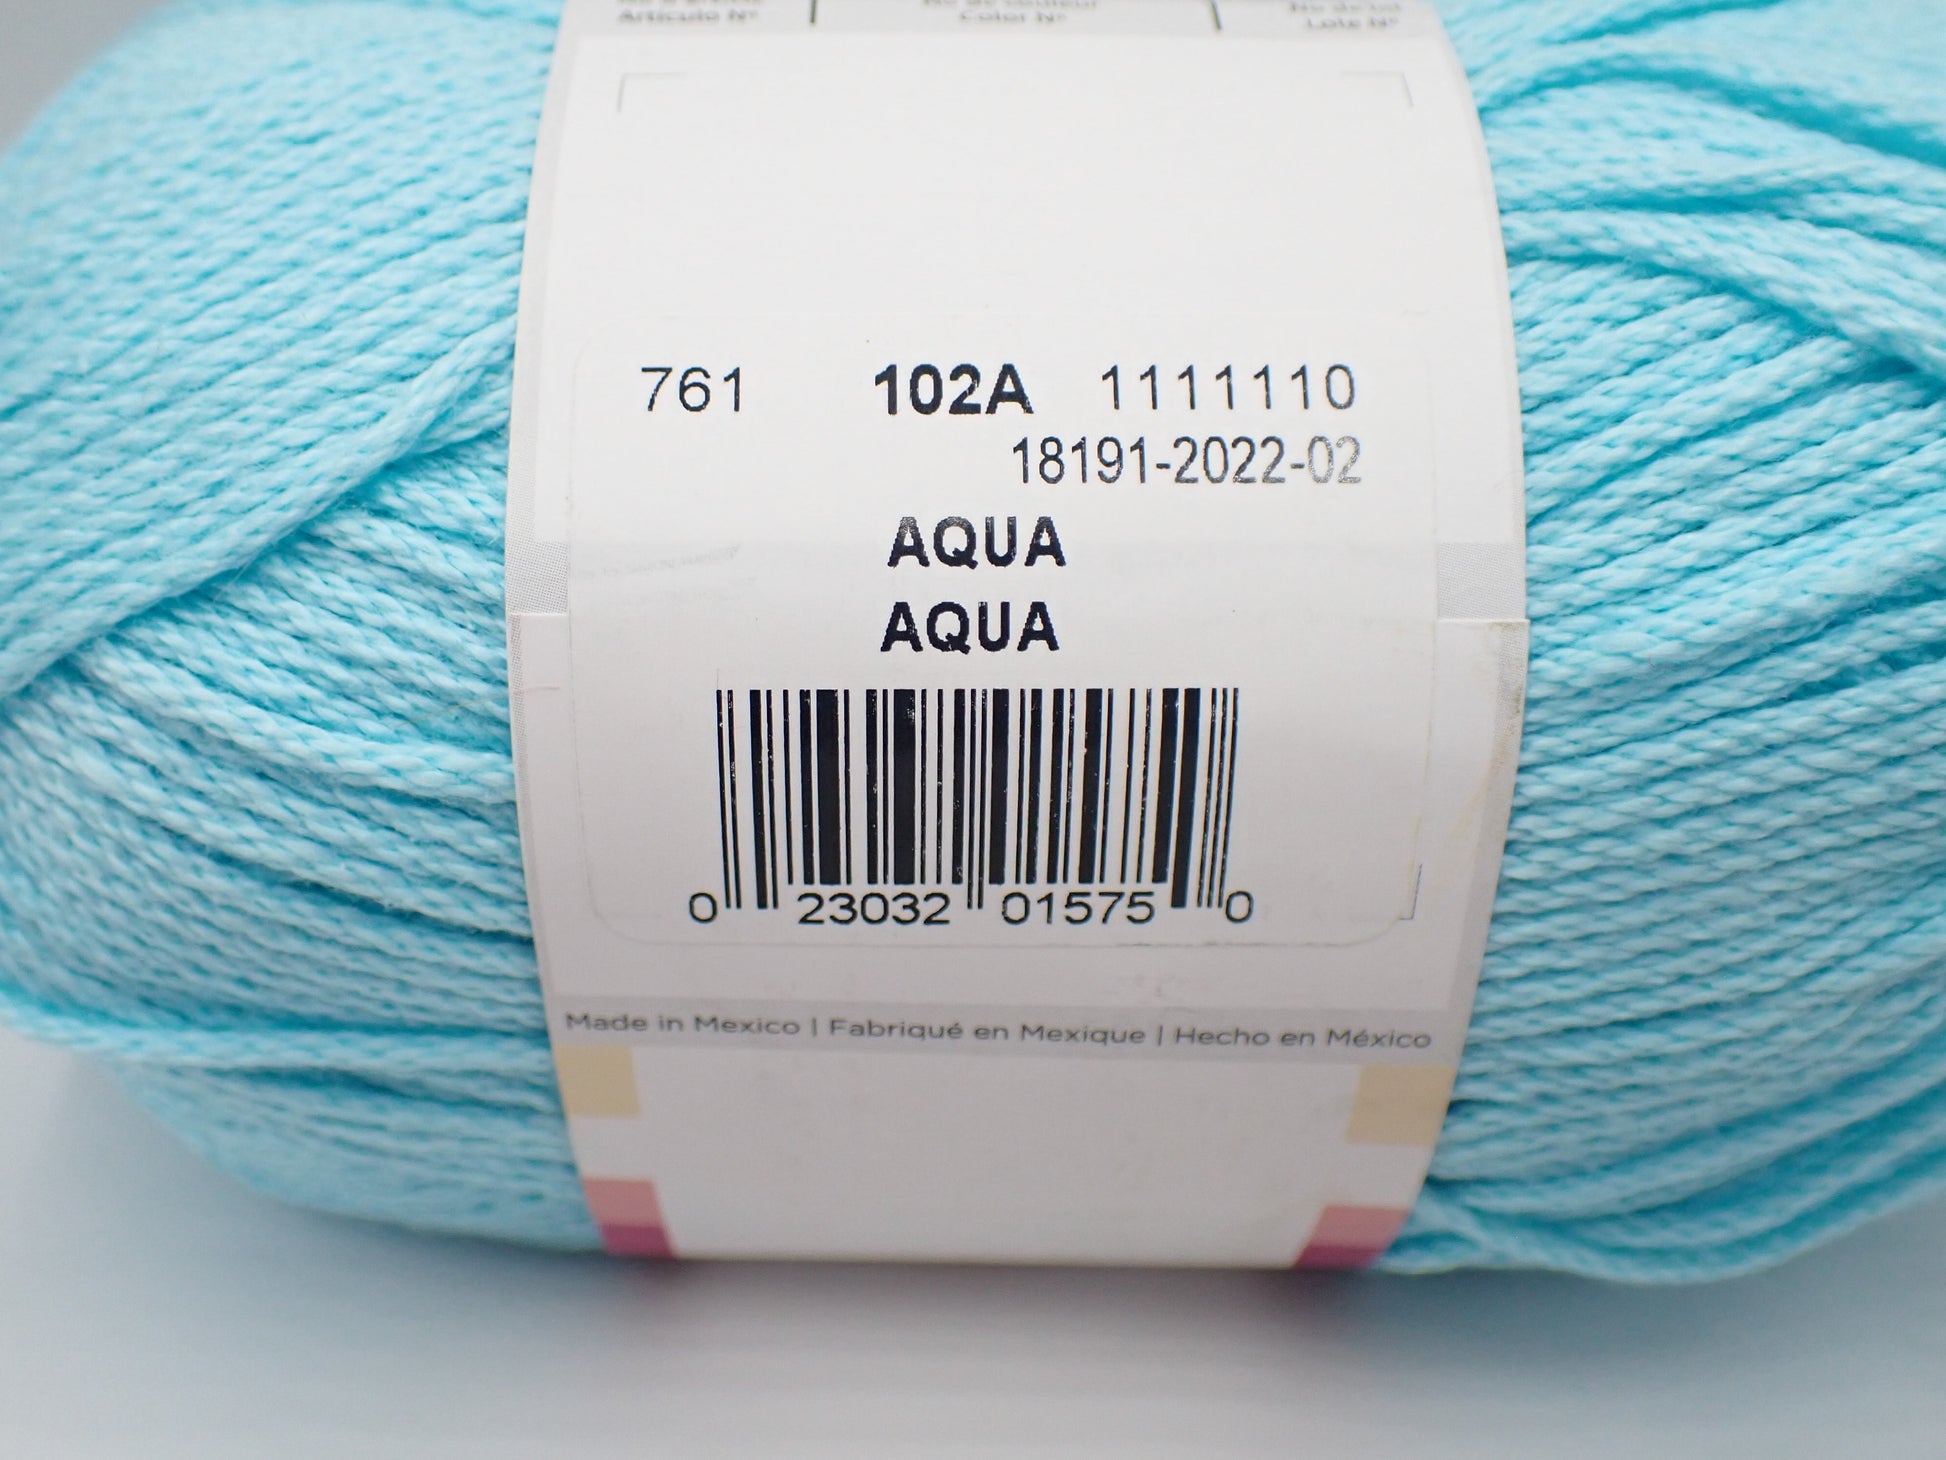 Lion Brand Yarns Worsted weight 24/7 Cotton Yarn Navy – Sweetwater